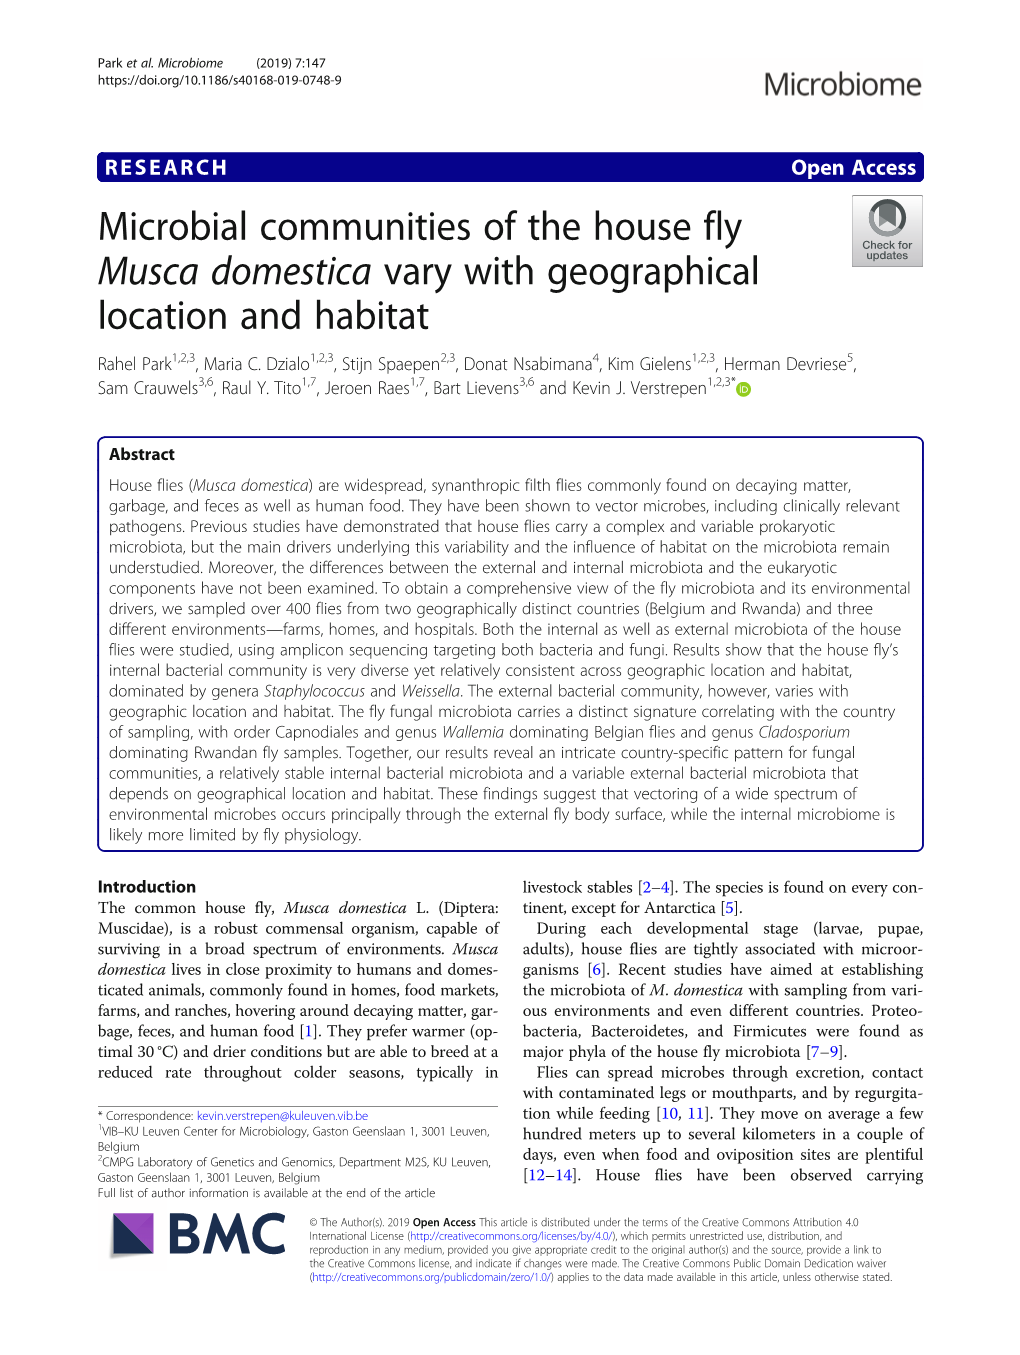 Microbial Communities of the House Fly Musca Domestica Vary with Geographical Location and Habitat Rahel Park1,2,3, Maria C